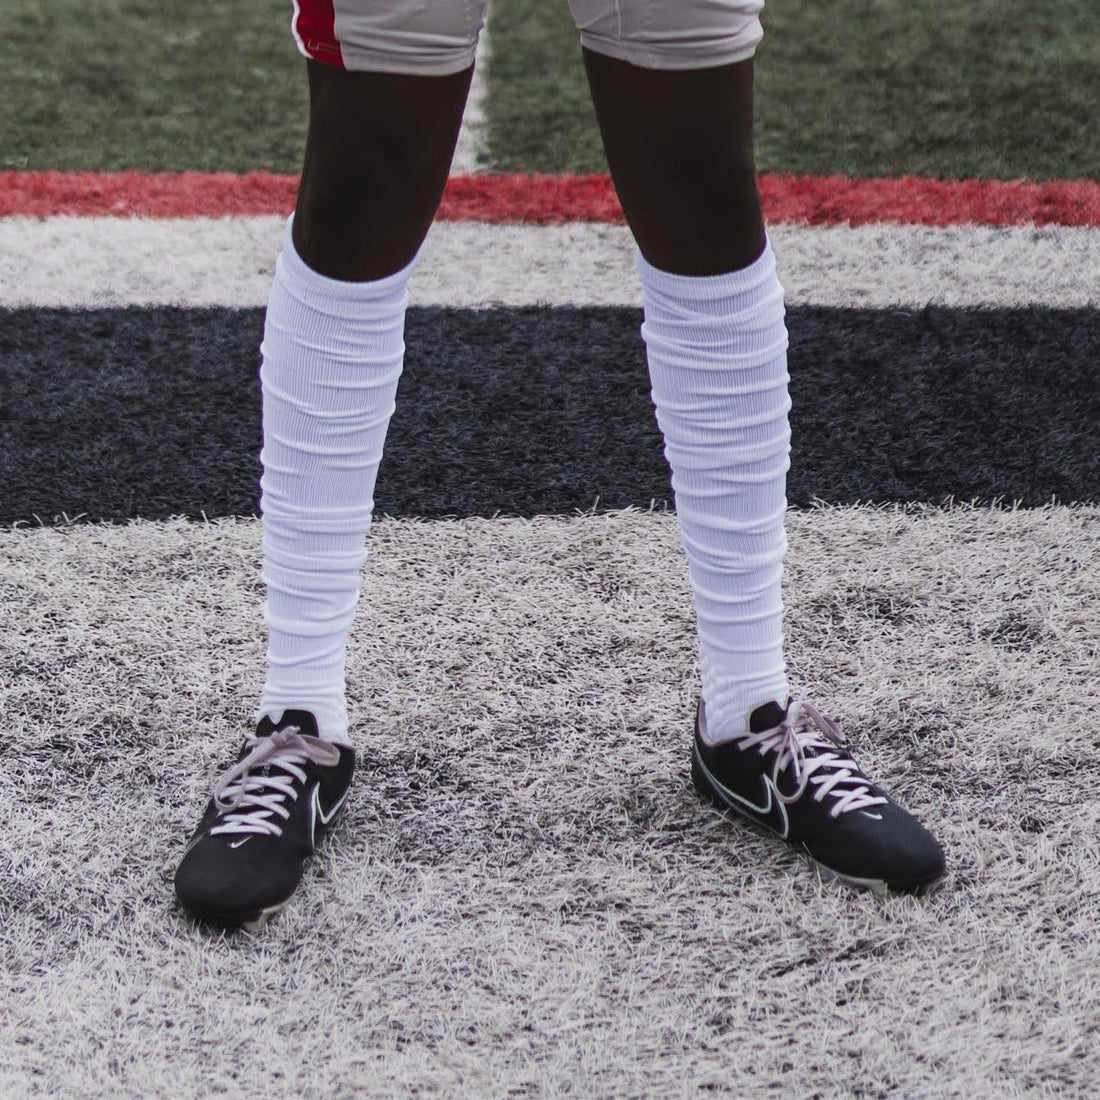 How to Choose the Best Long Padded Football Socks for Your Game - We Ball Sports